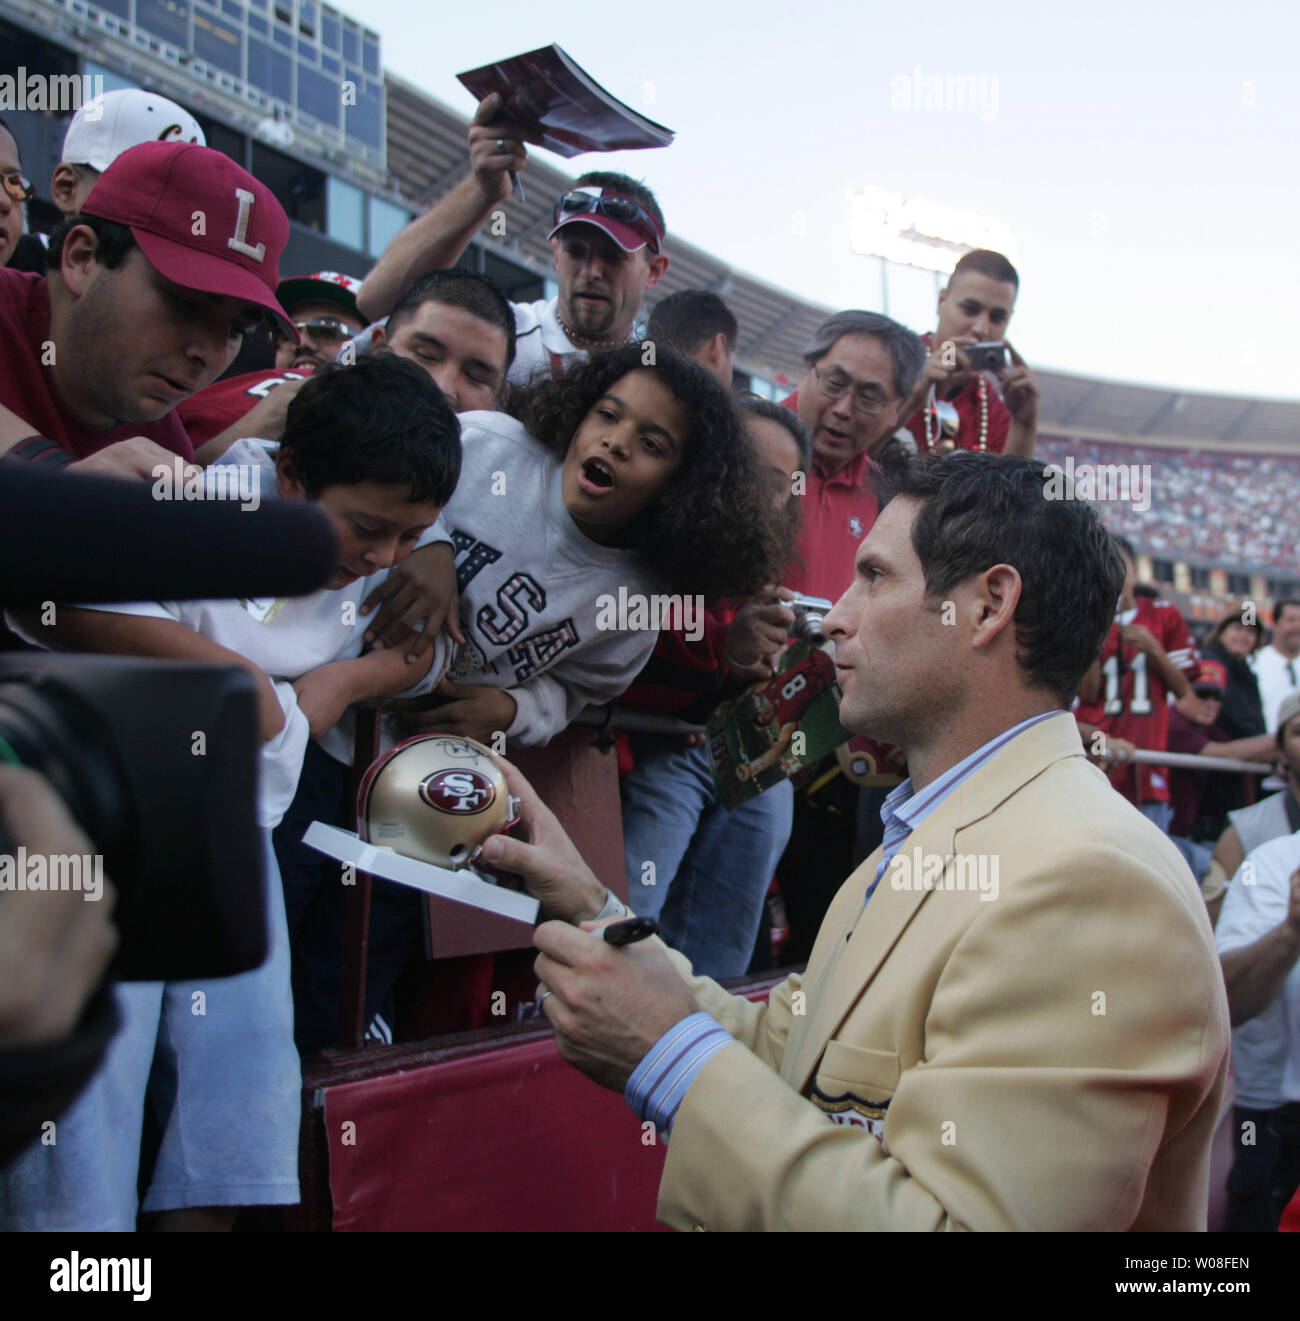 Hall of Fame QB Steve Young signs autographs at Monster Park in San Francisco on November 20, 2005. Young was honored as a new enshrinee to the Hall.  (UPI Photo/Terry Schmitt) Stock Photo